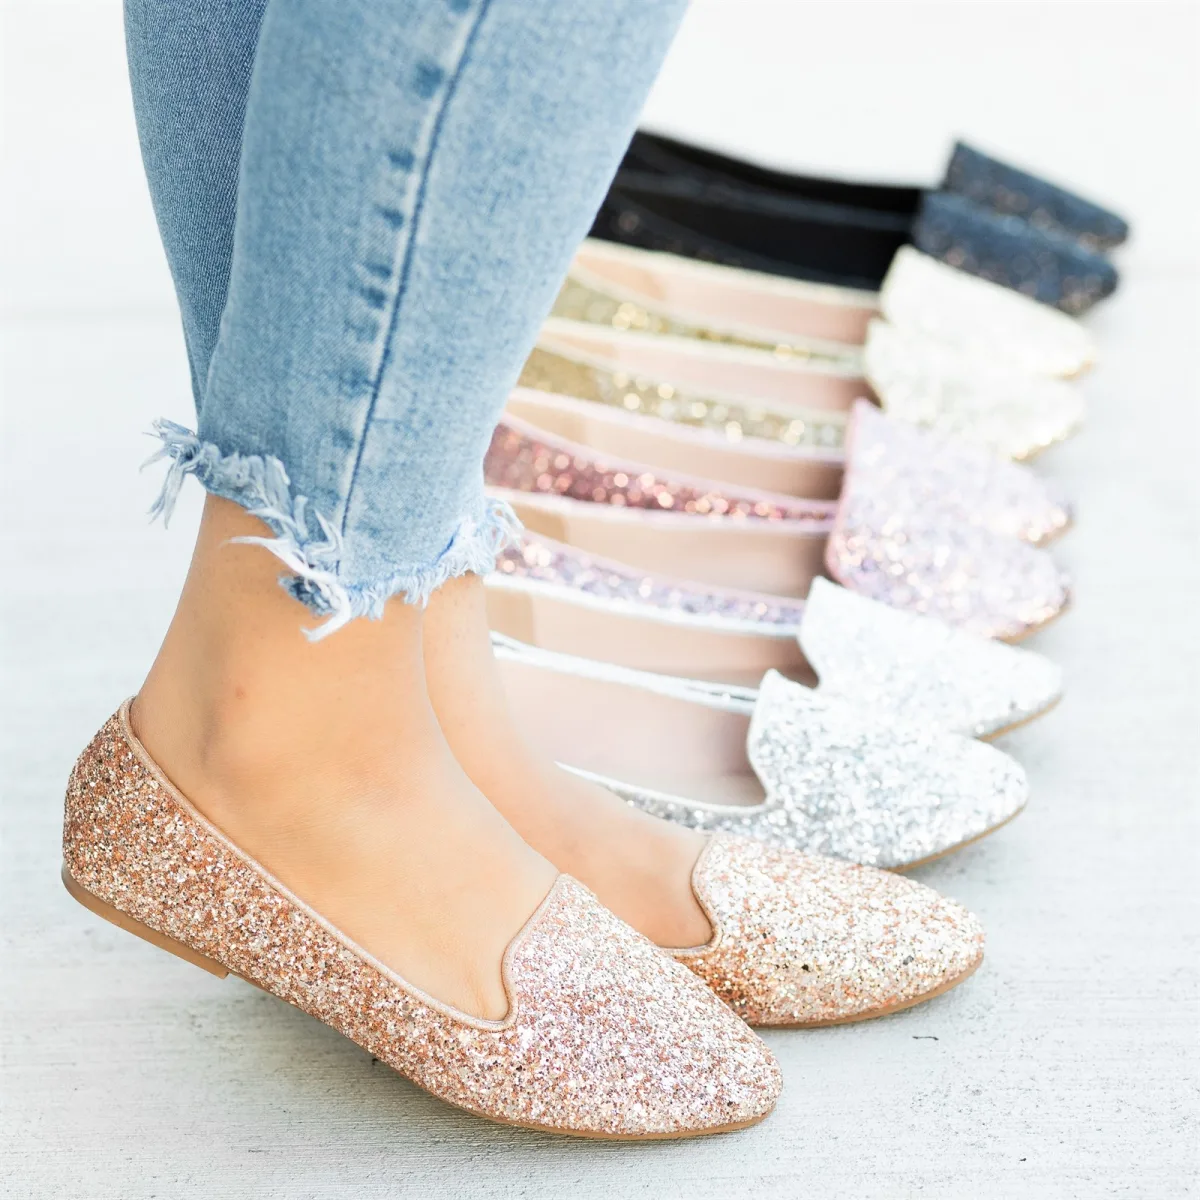 Glitter Loafers Only $12.99 SHIPPED!